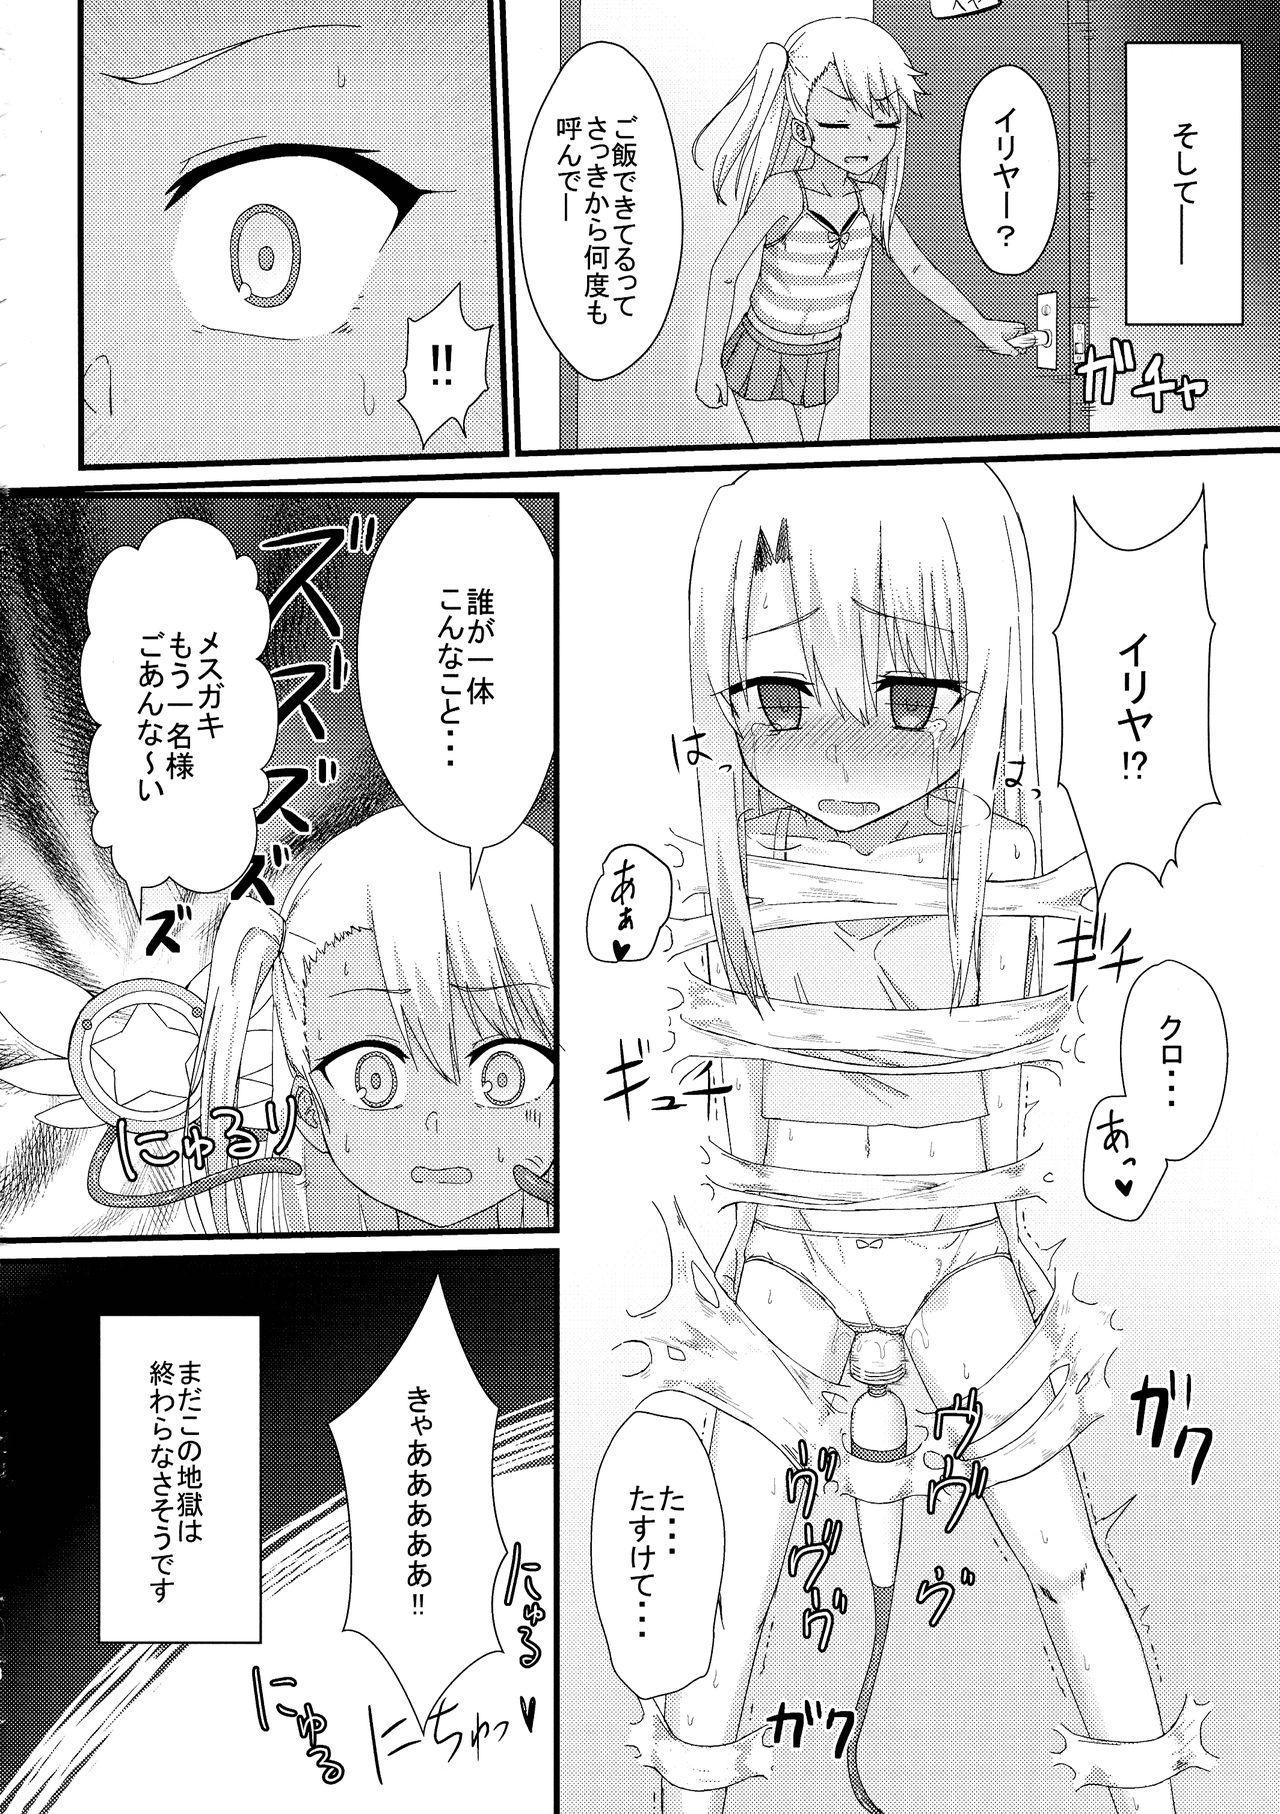 Wives Illya to Ruby Etchi Etchi Secret Function - Fate kaleid liner prisma illya Pegging - Page 16